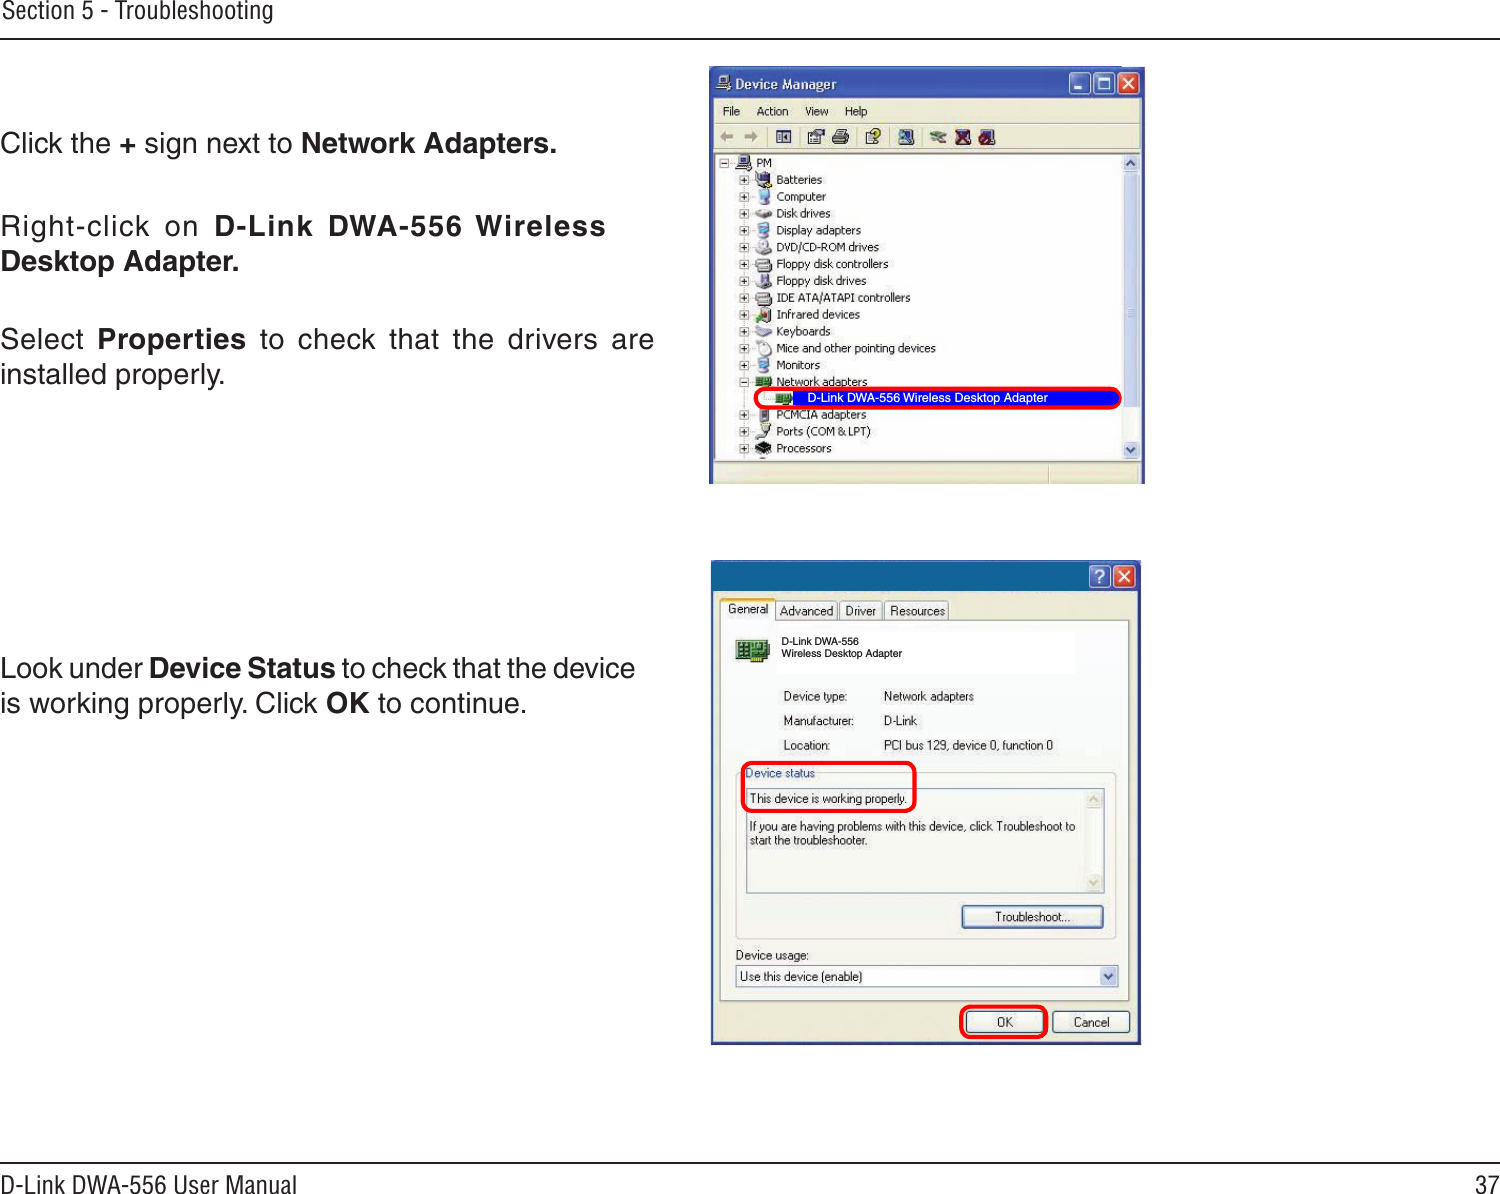 37D-Link DWA-556 User ManualSection 5 - TroubleshootingClick the + sign next to Network Adapters.Right-click  on  D-Link  DWA-556 Wireless Desktop Adapter.Select  Properties  to  check  that  the  drivers  are installed properly.Look under Device Status to check that the device is working properly. Click OK to continue.D-Link DWA-556 Wireless Desktop AdapterD-Link DWA-556 Wireless Desktop Adapter